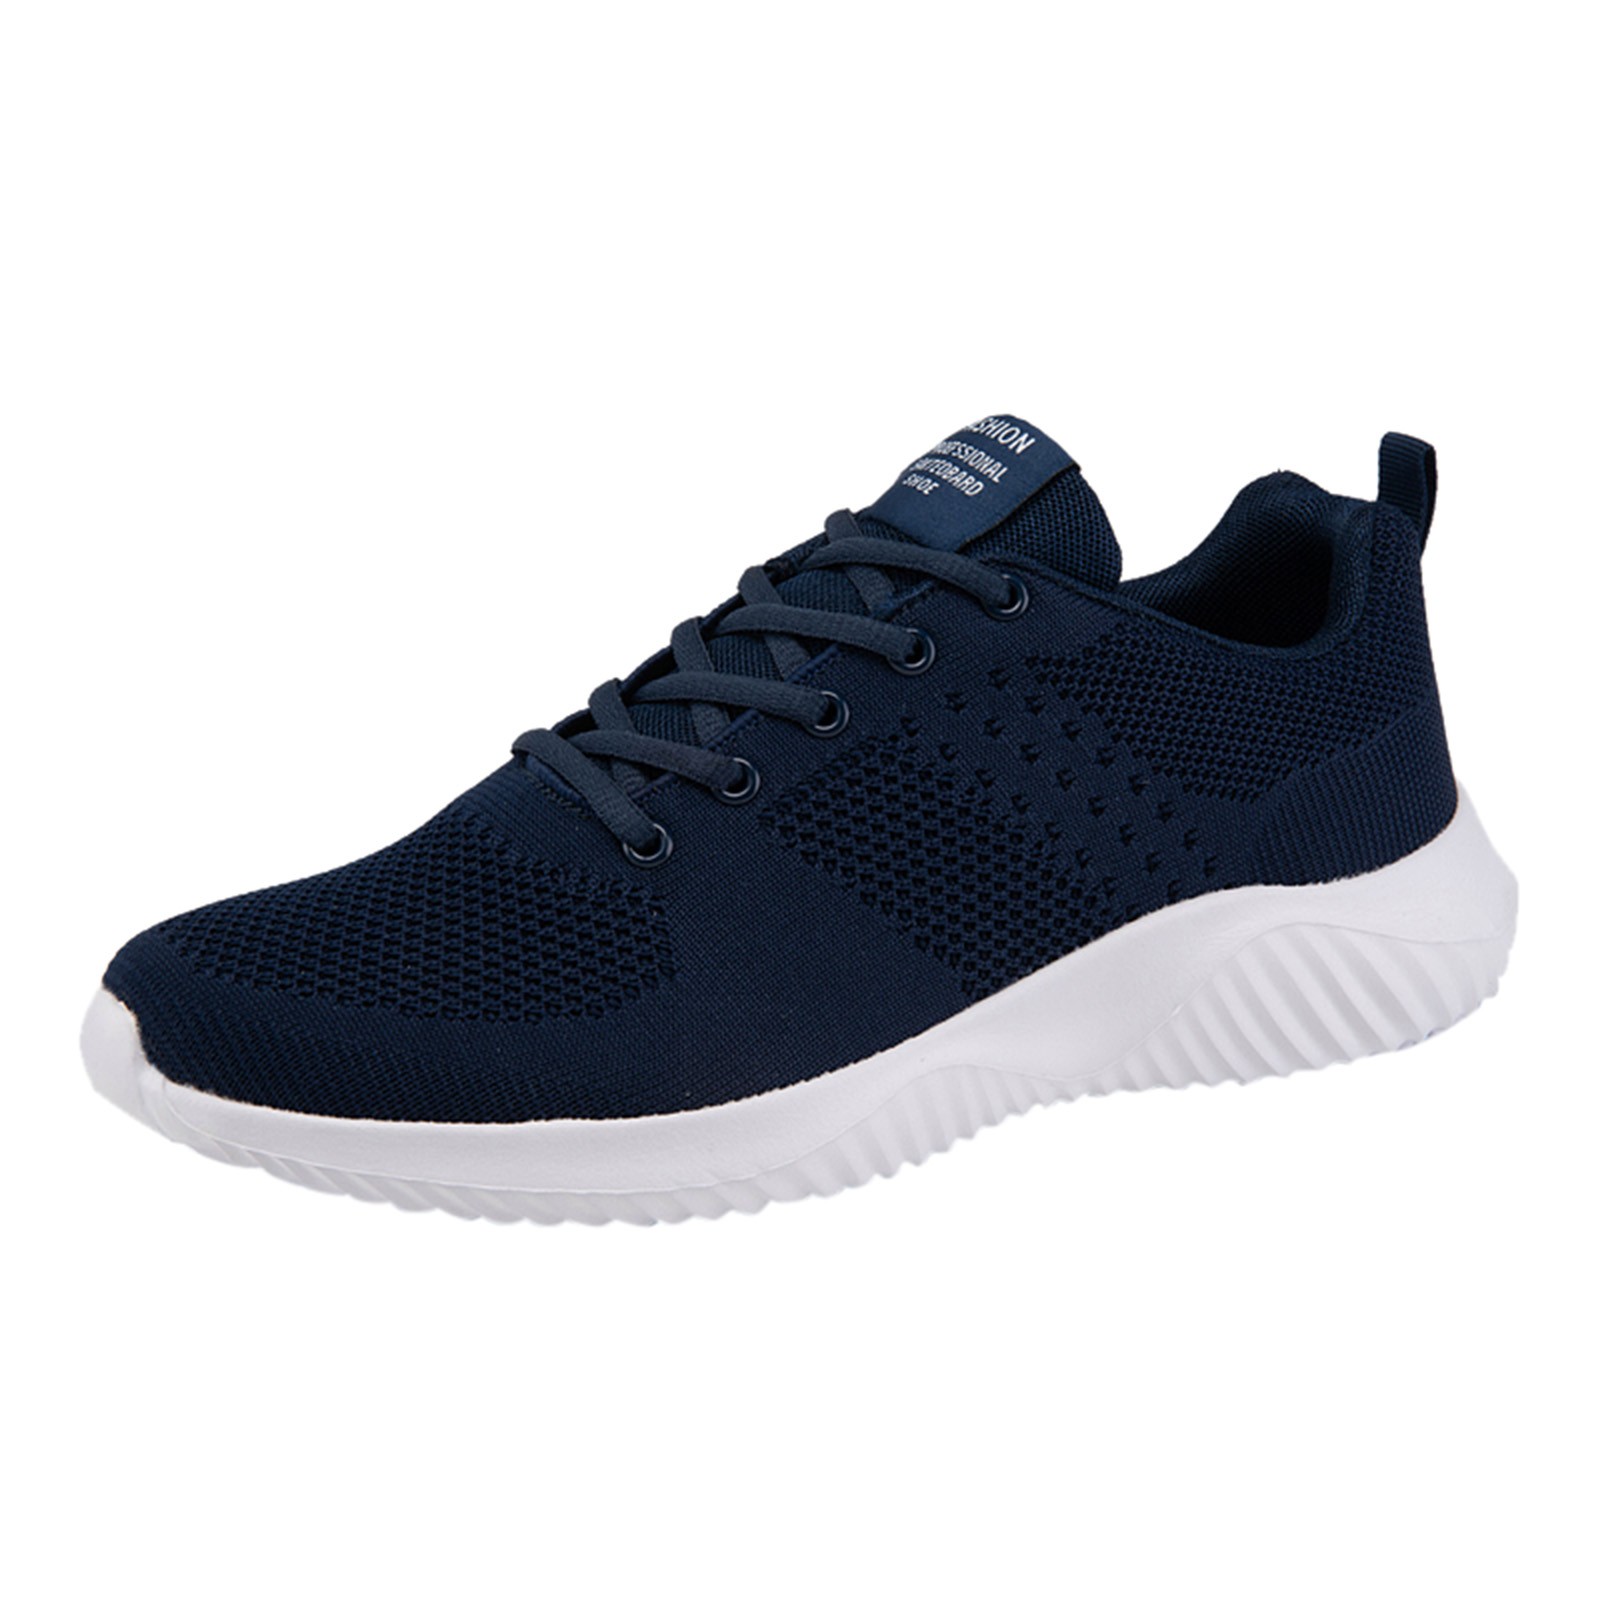 CBGELRT Shoes for Men Classic Men's Sneakers Tennis Shoes for Men Fashion Men Mesh Casual Sport Shoes Lace-up Breathable Soft Bottom Sneakers Male Blue 45 - image 1 of 9